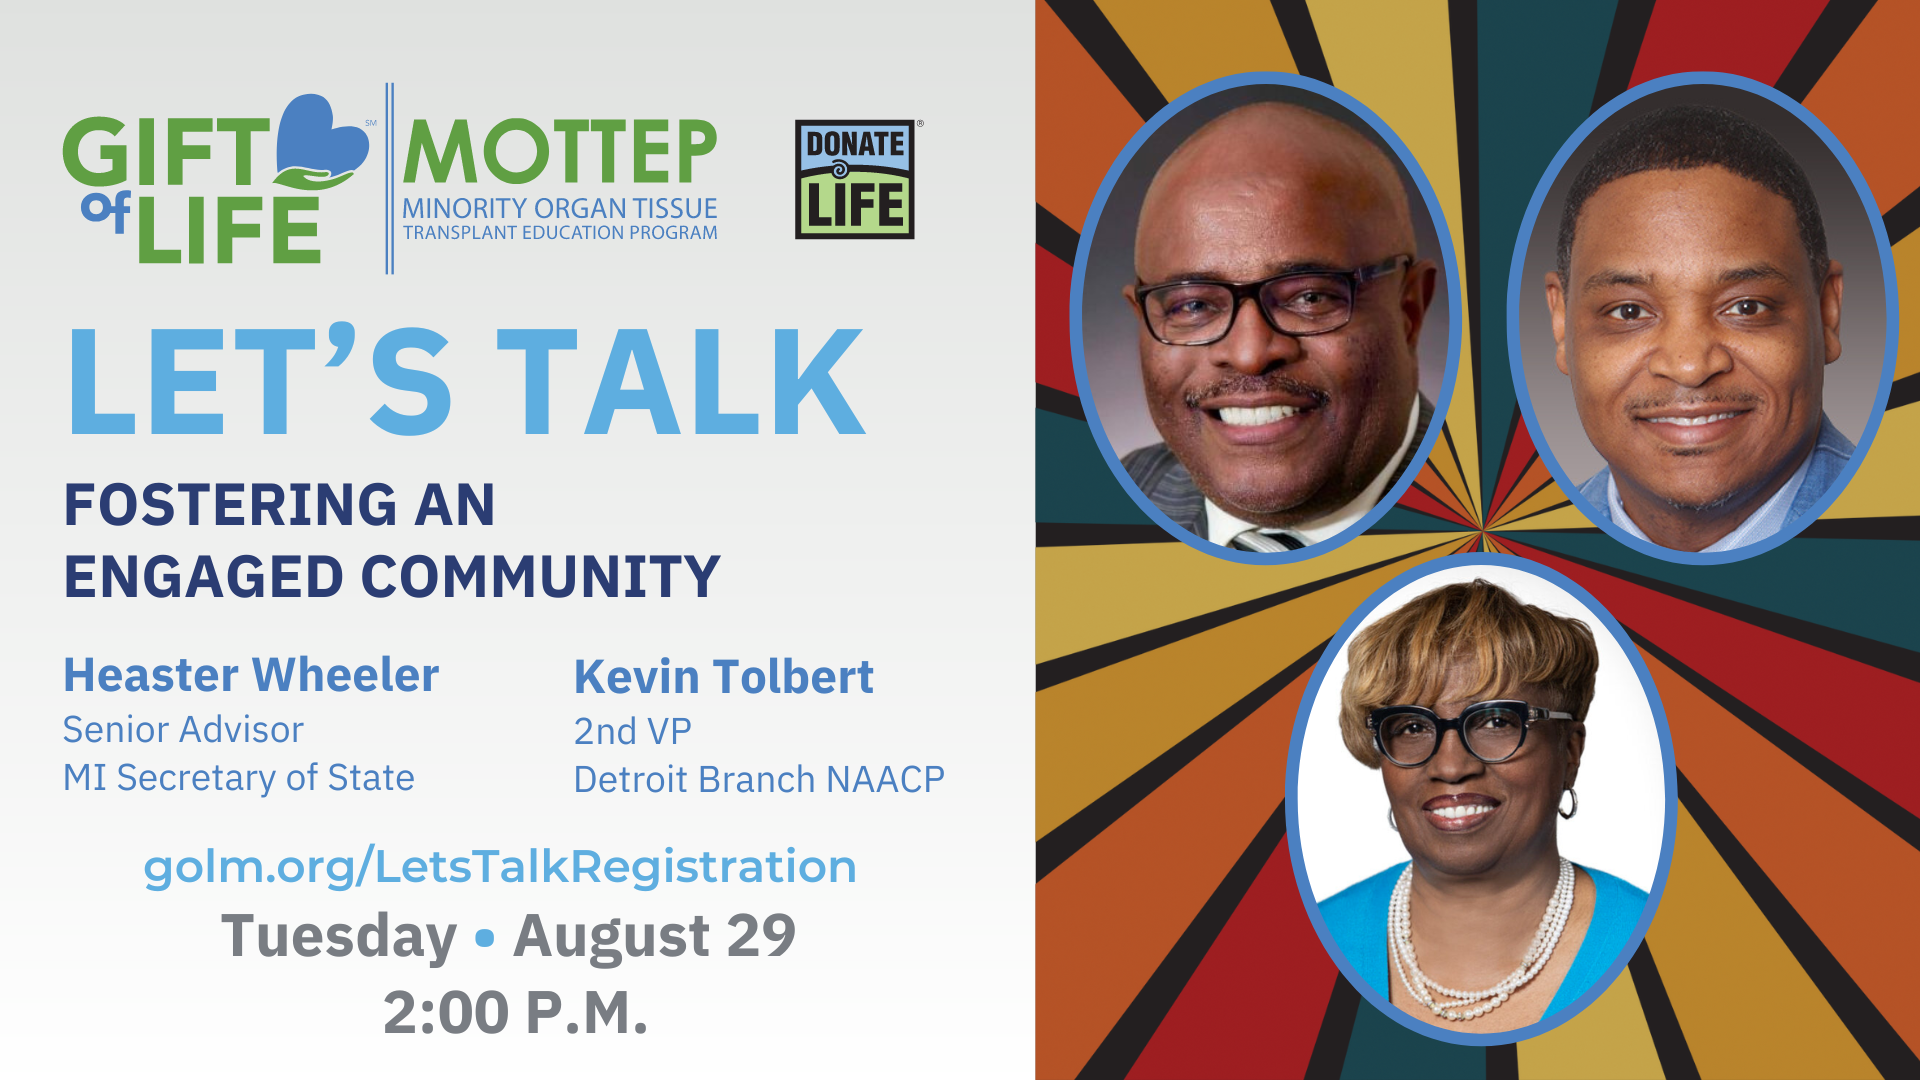 Let's Talk graphic: Fostering an engaged community. Discussion with Remonia Chapman from Gift of Life Michigan, Heaster Wheeler from the Michigan Department of State, and Kevin Tolbert from the NAACP Detroit Branch